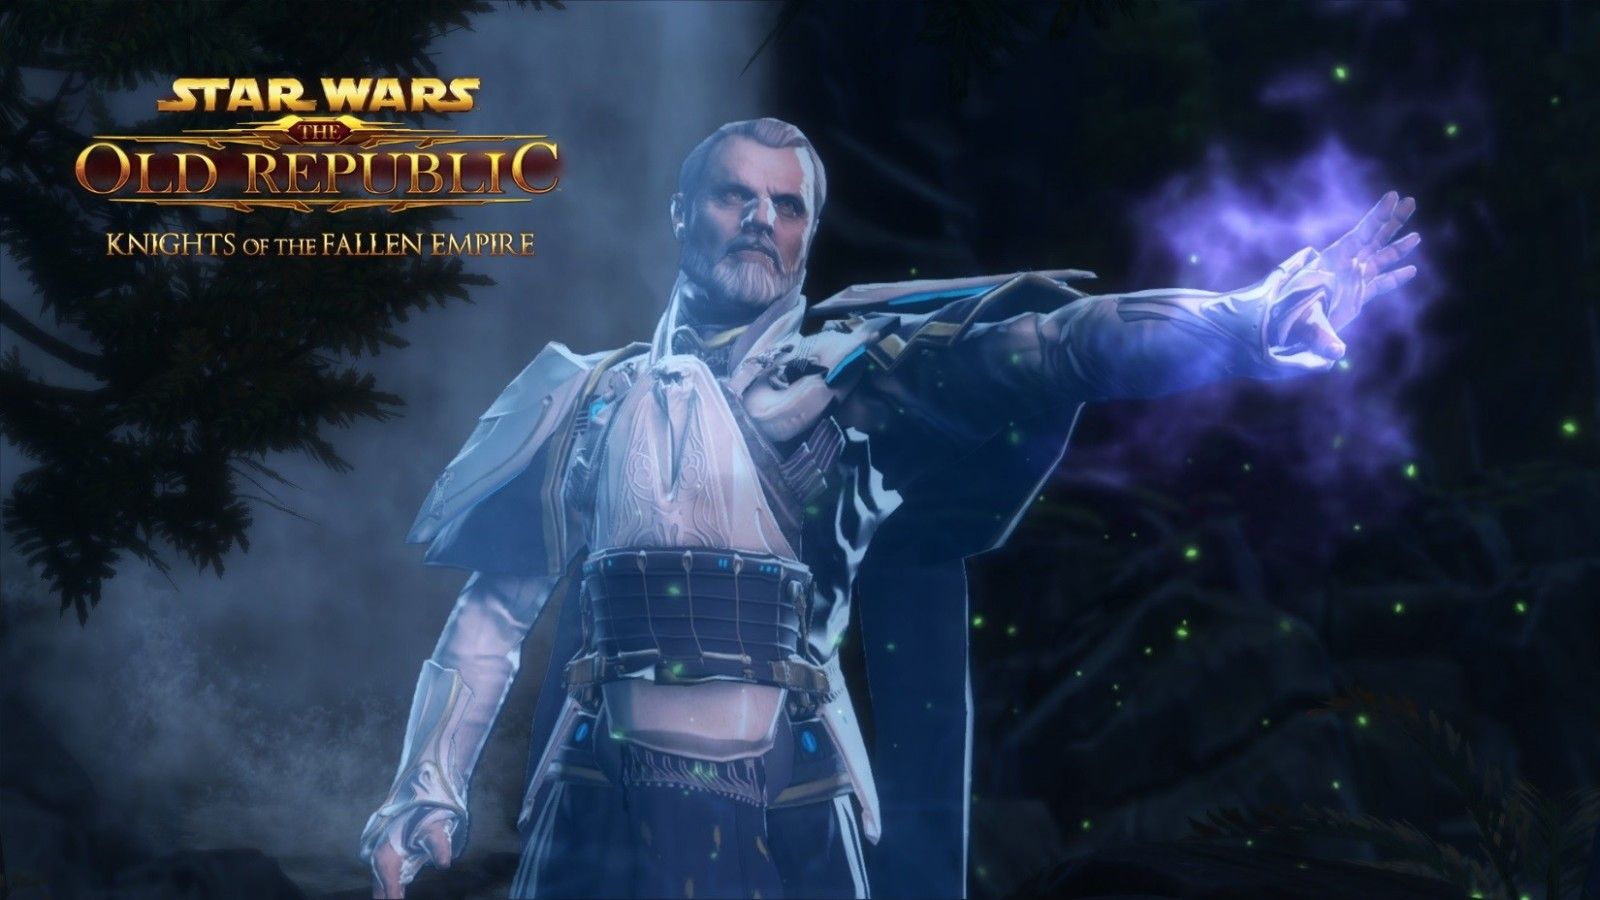 Is Star Wars the Old Republic worth playing in 2020?